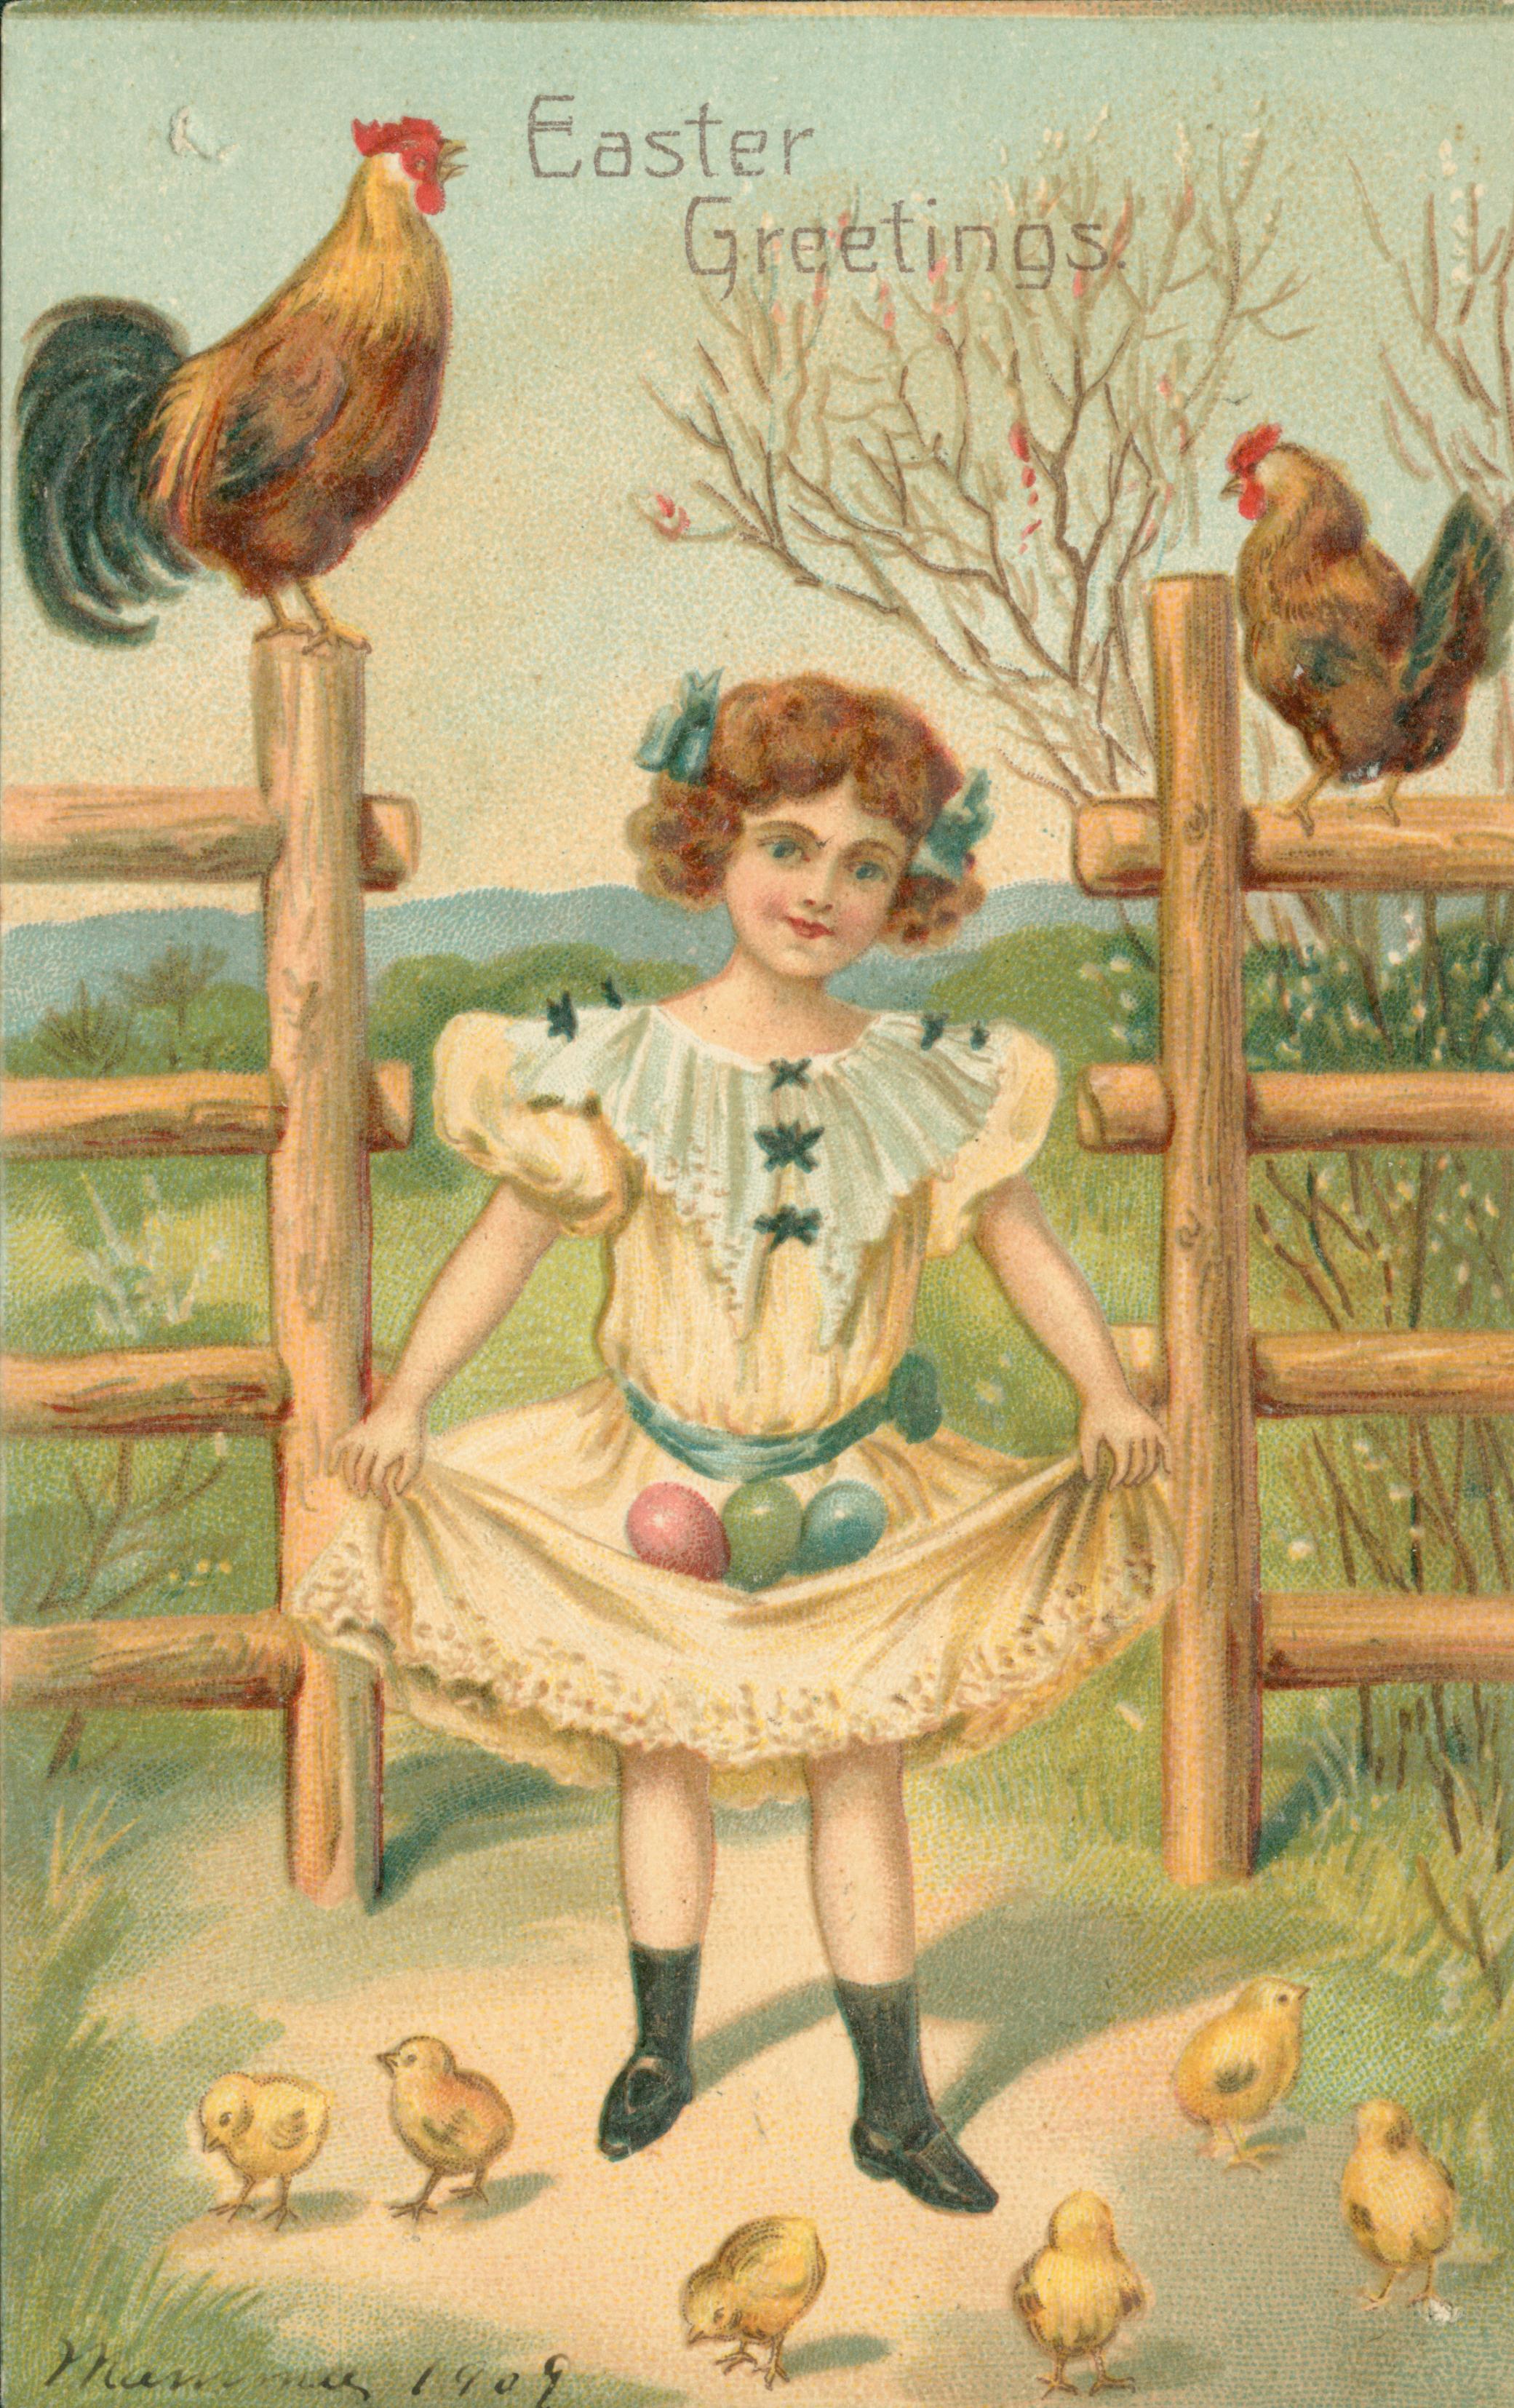 Drawing of a girl collecting colored eggs surrounded by chicks and chickens.